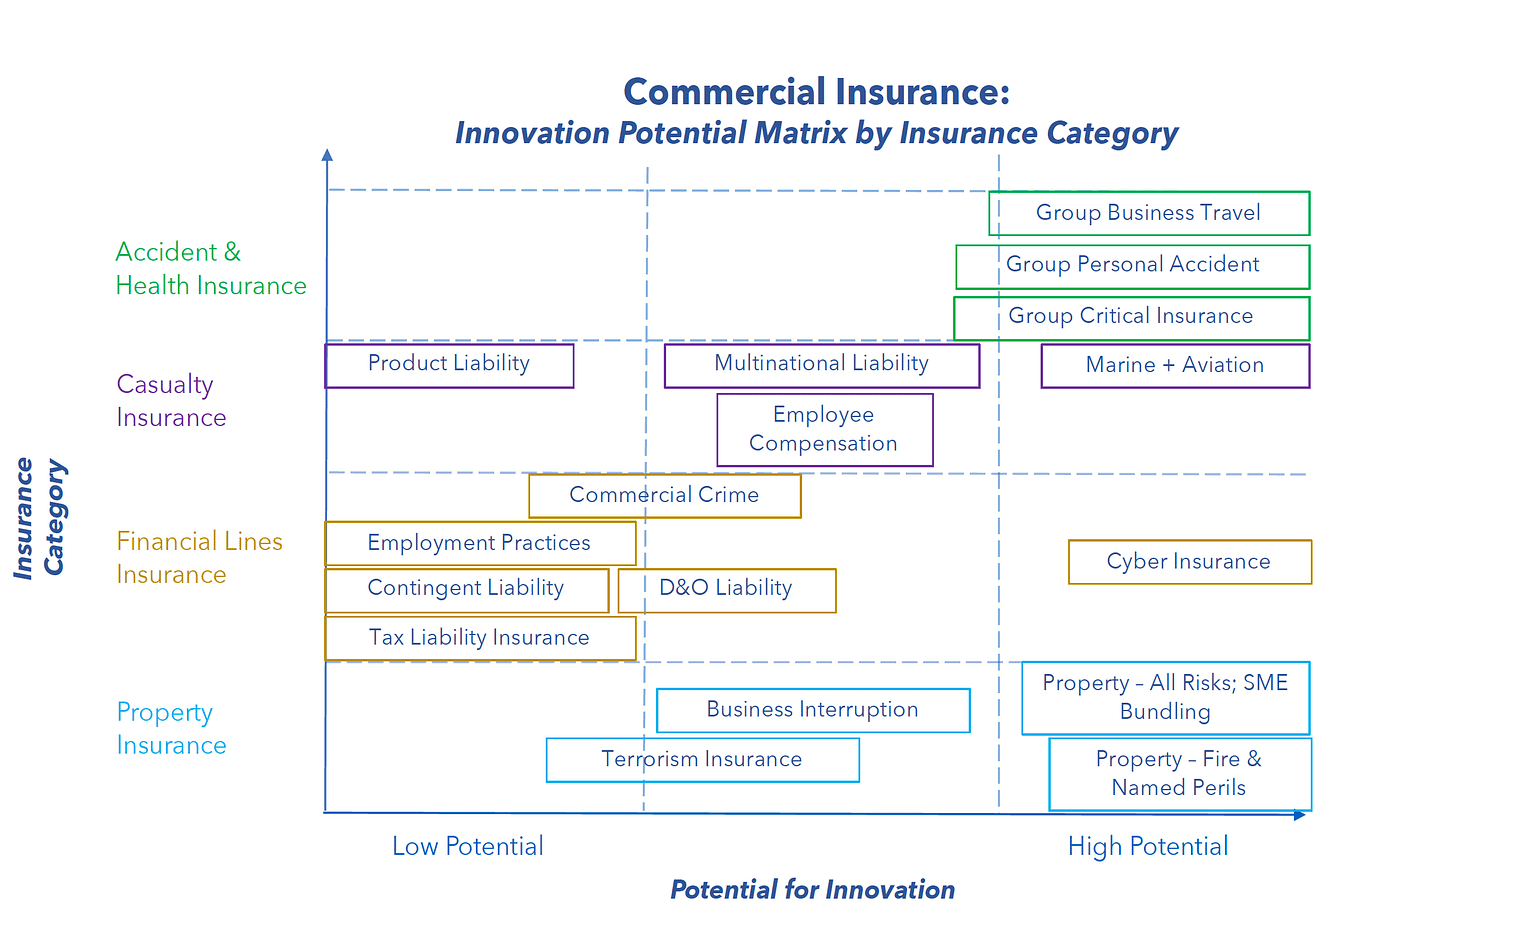 Commercial Insurance: Innovation Potential Matrix by Insurance Category